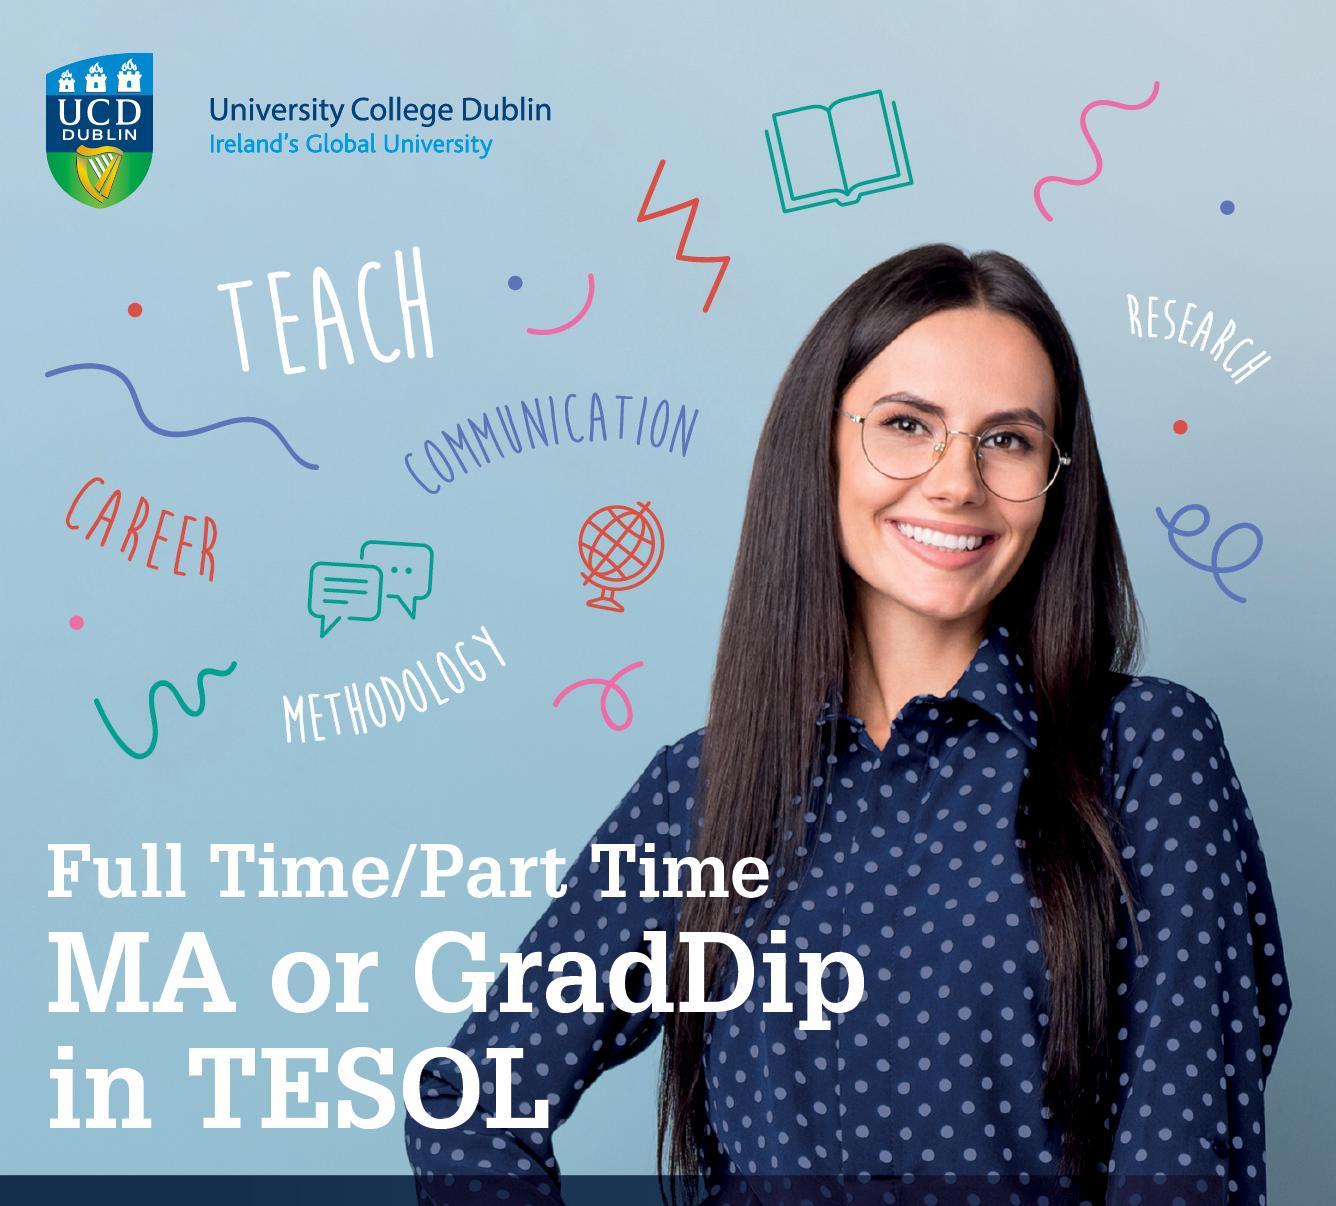 Thinking of applying for an MA or Graduate Diploma in TESOL (Teaching English to speakers of other languages)? 